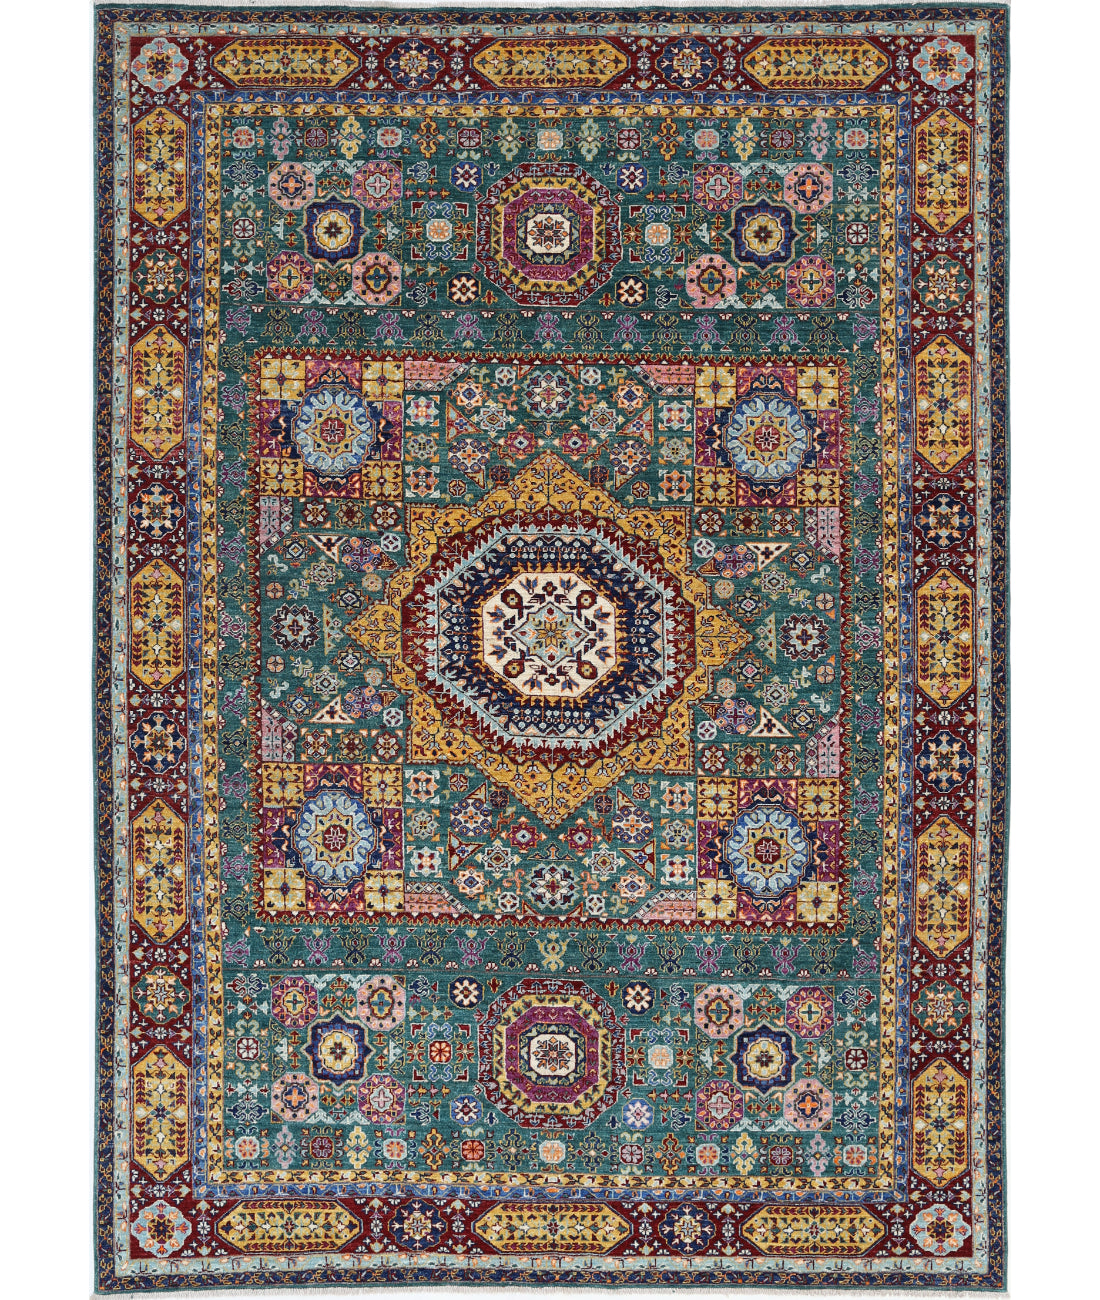 Mamluk 6'9'' X 9'6'' Hand-Knotted Wool Rug 6'9'' x 9'6'' (203 X 285) / Green / Red